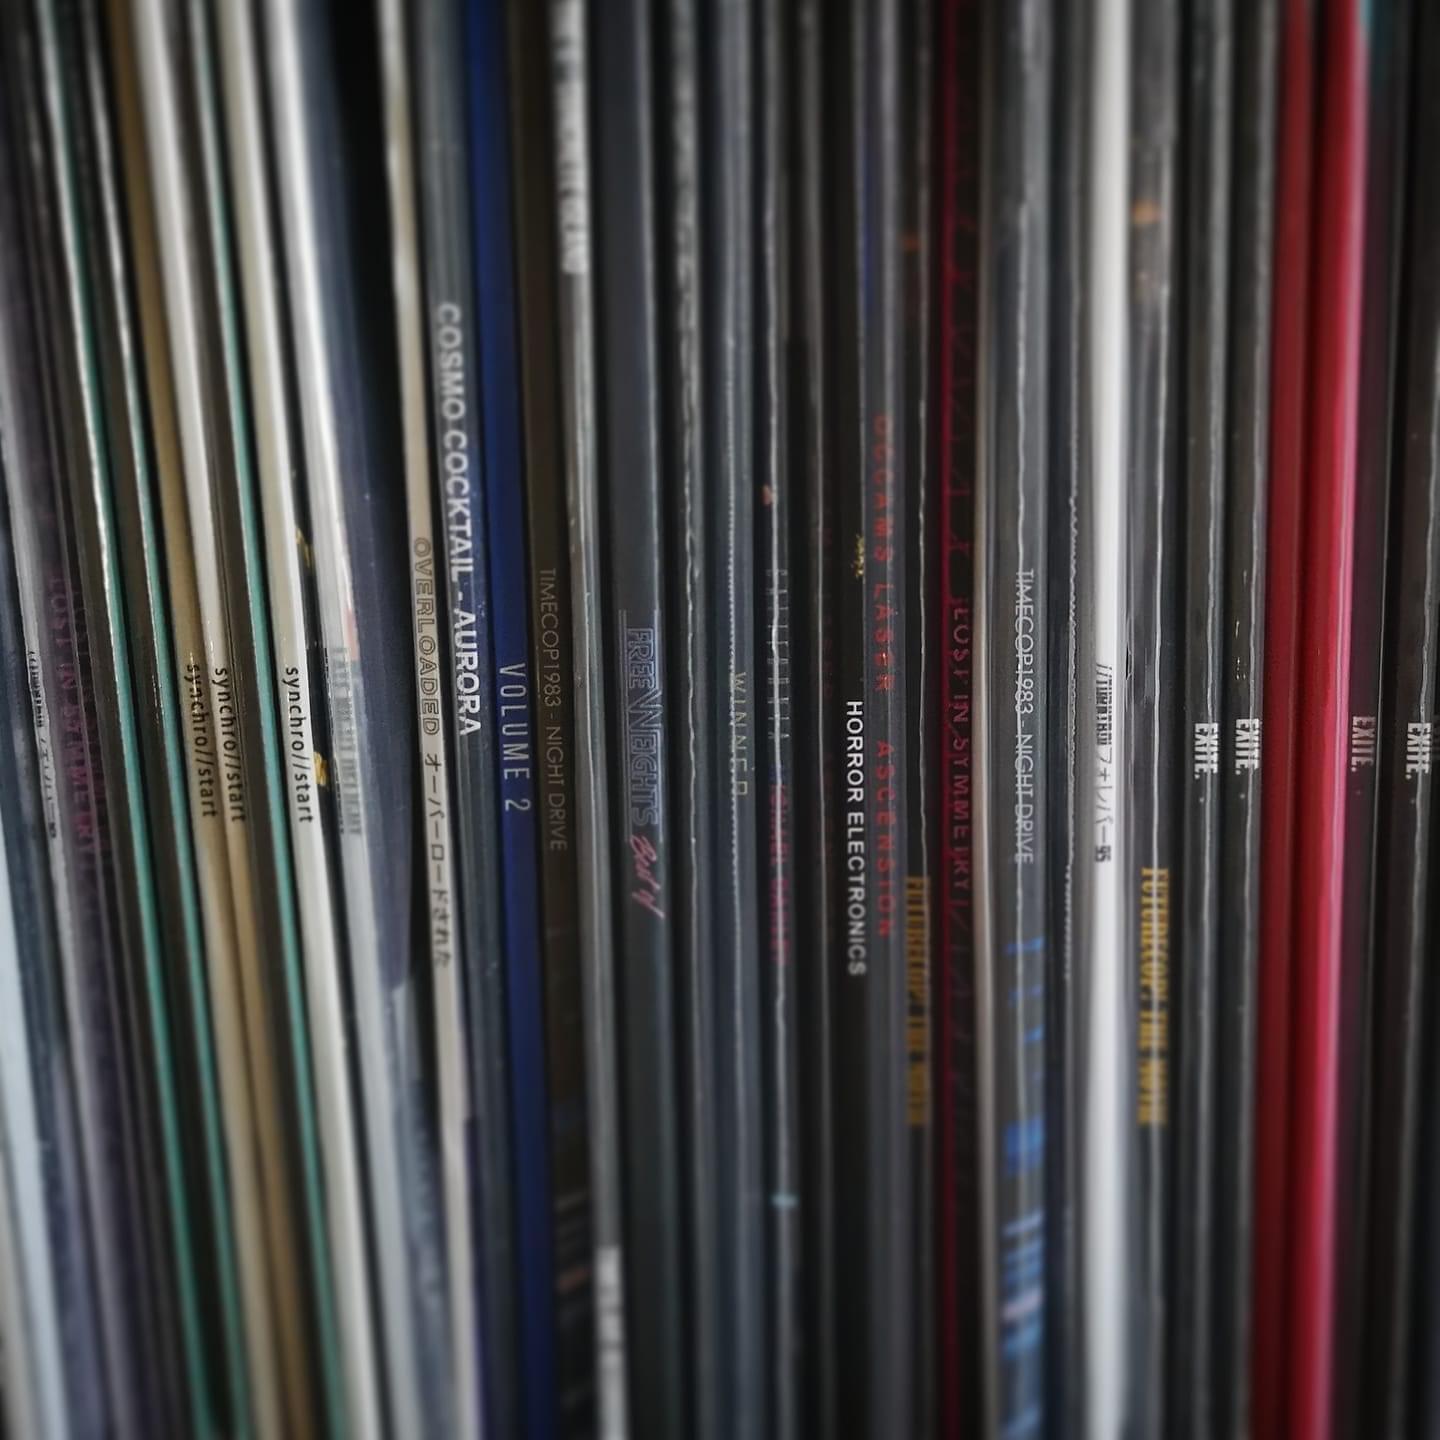 ‘Record sales’, but is there trouble in vinyl paradise?